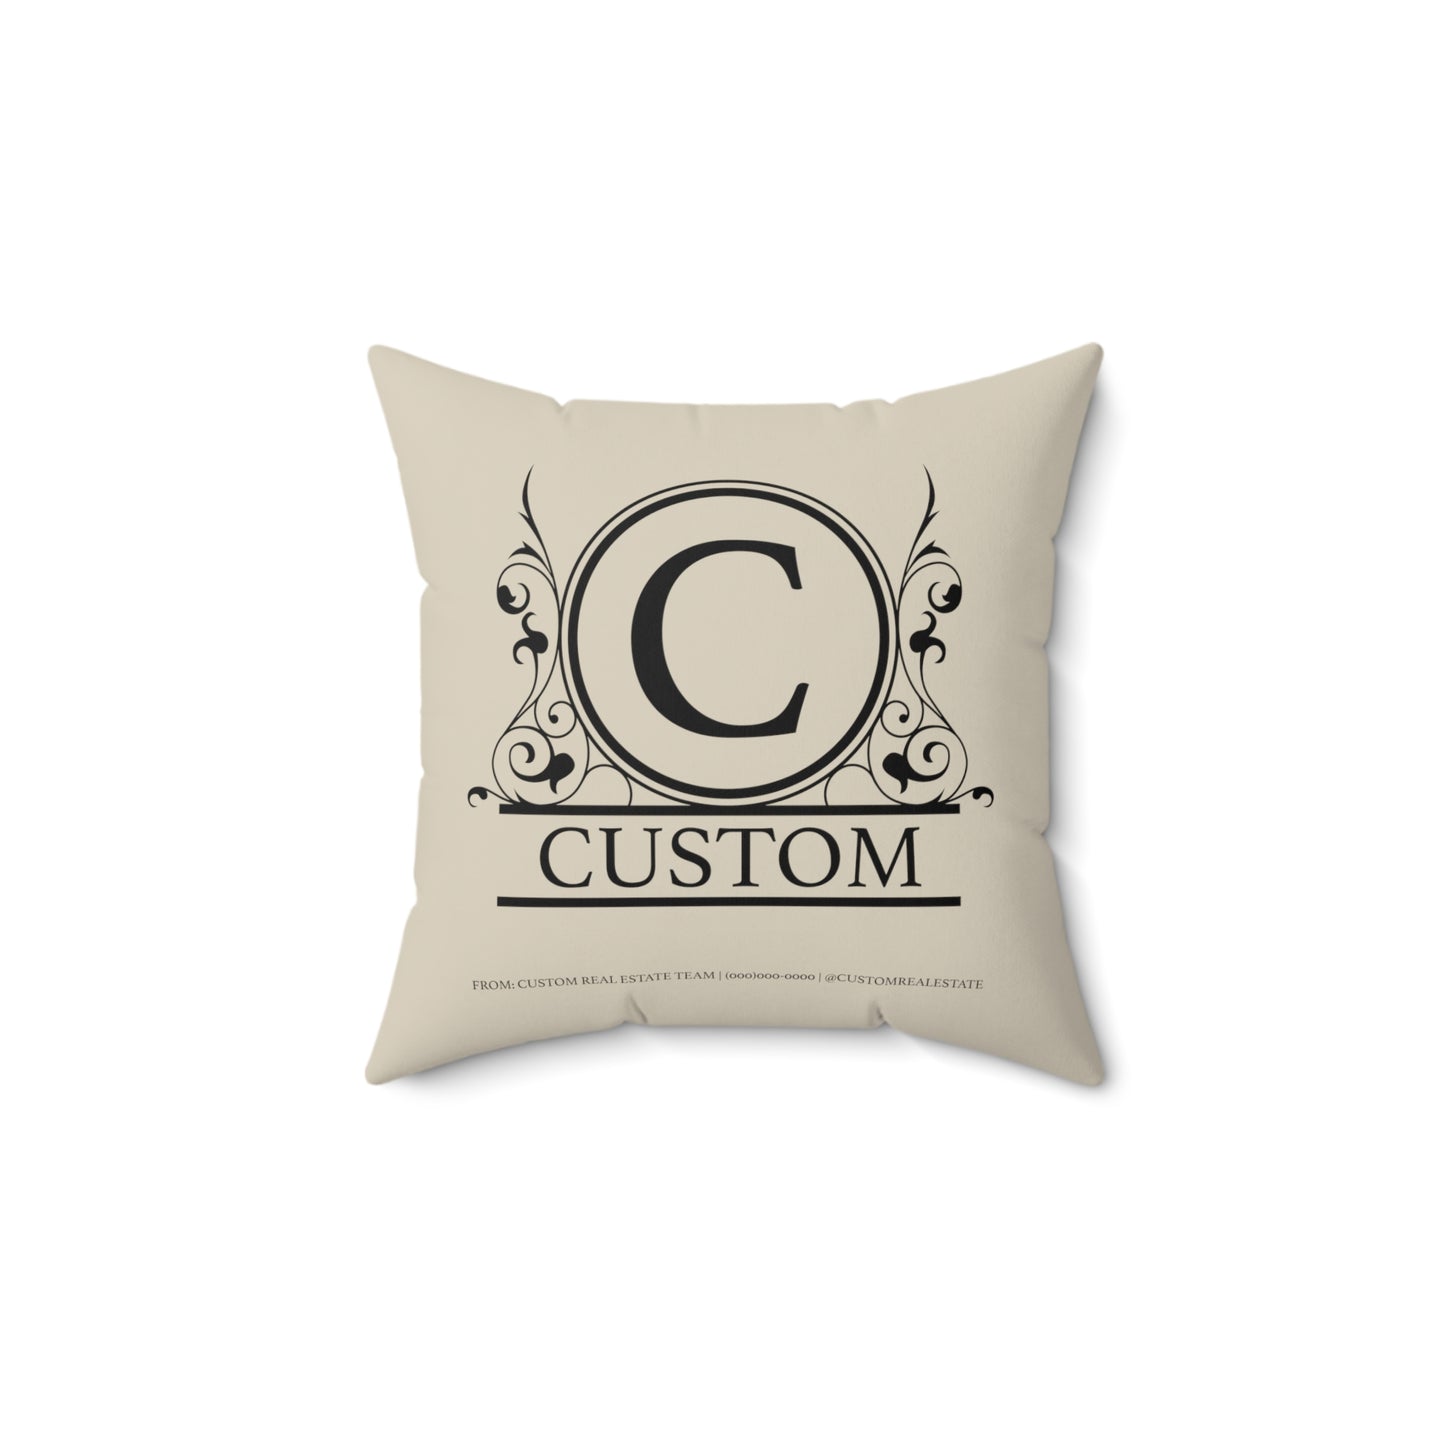 Personalized Monogram Square Cover (Case + Pillow Insert)